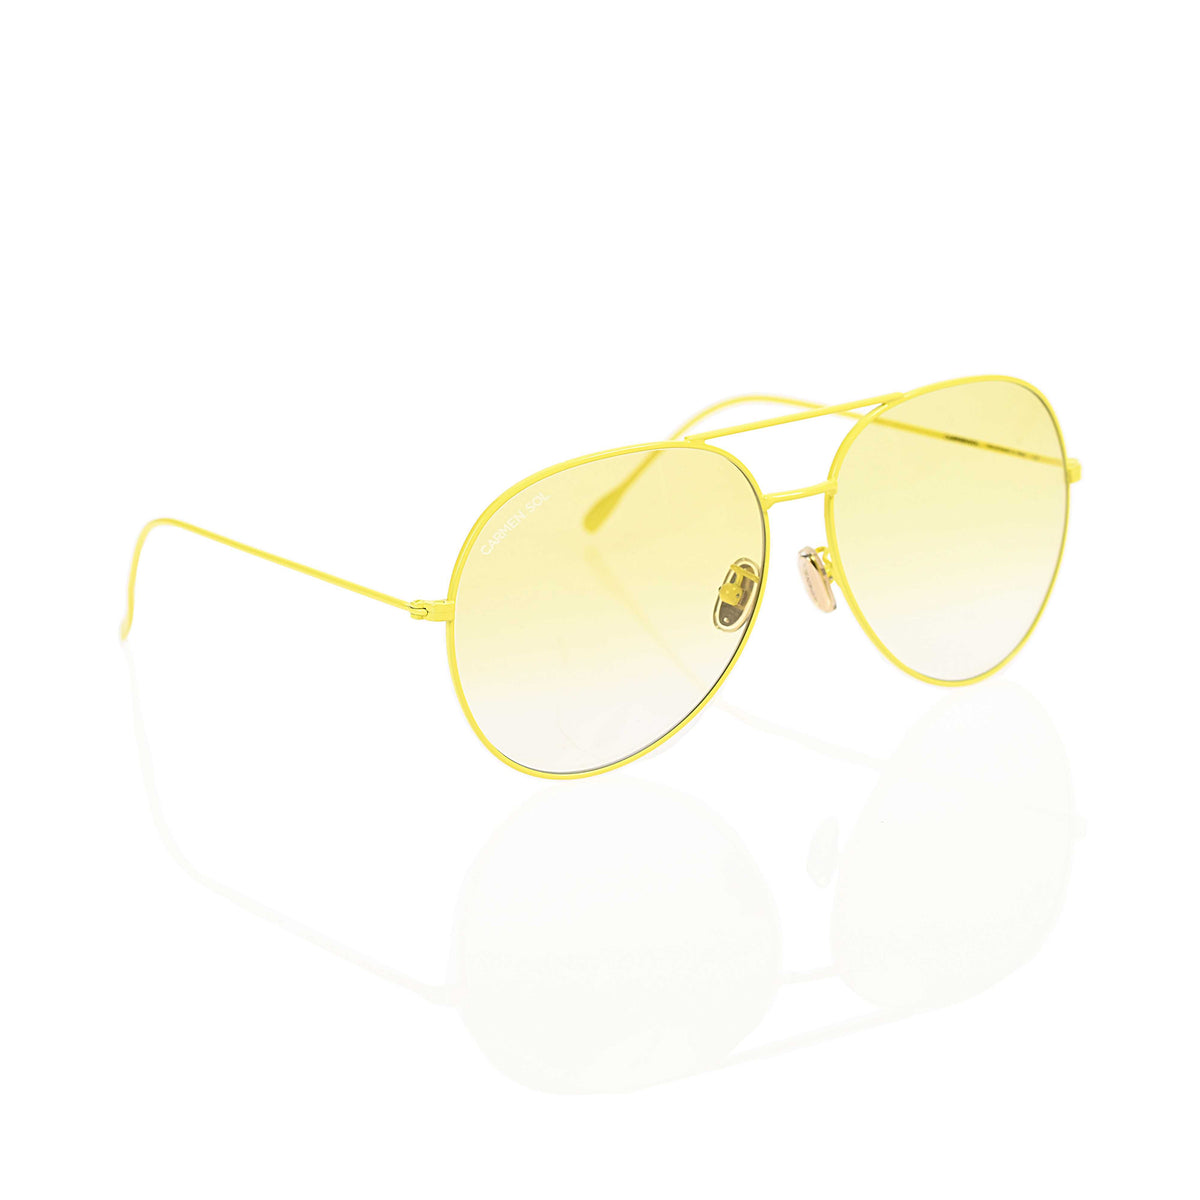 Yellow aviators attracts the crowd. Carmen sol aviator sunglasses for vacation lovers.